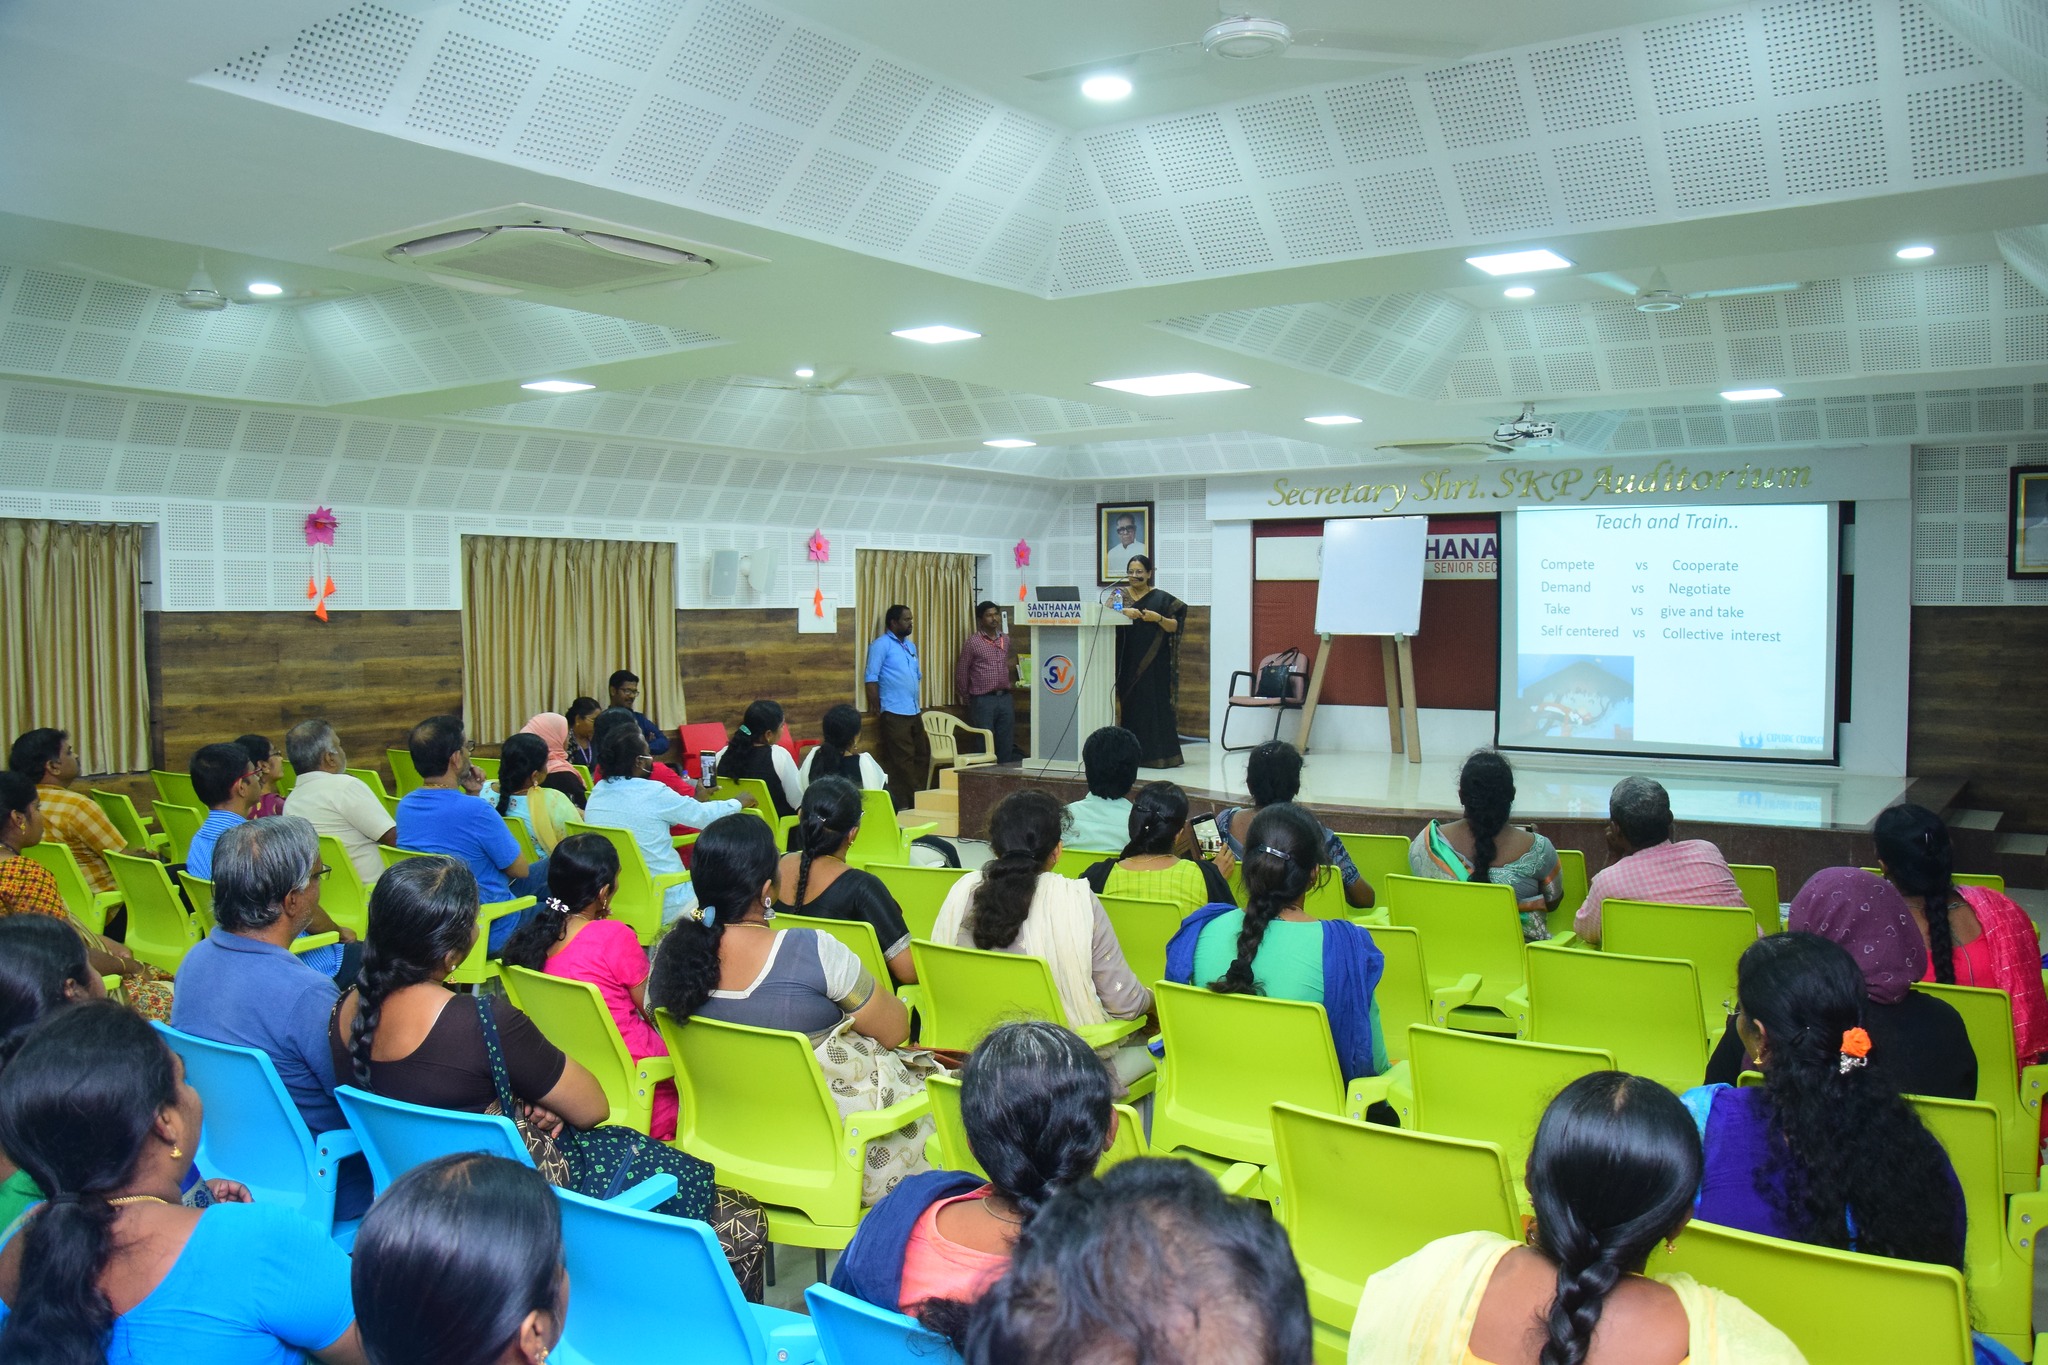 Sessions for students and Parents @ Santhanam group of Institutes..  " "Take charge of your Life" ... well received Sessions!!!!